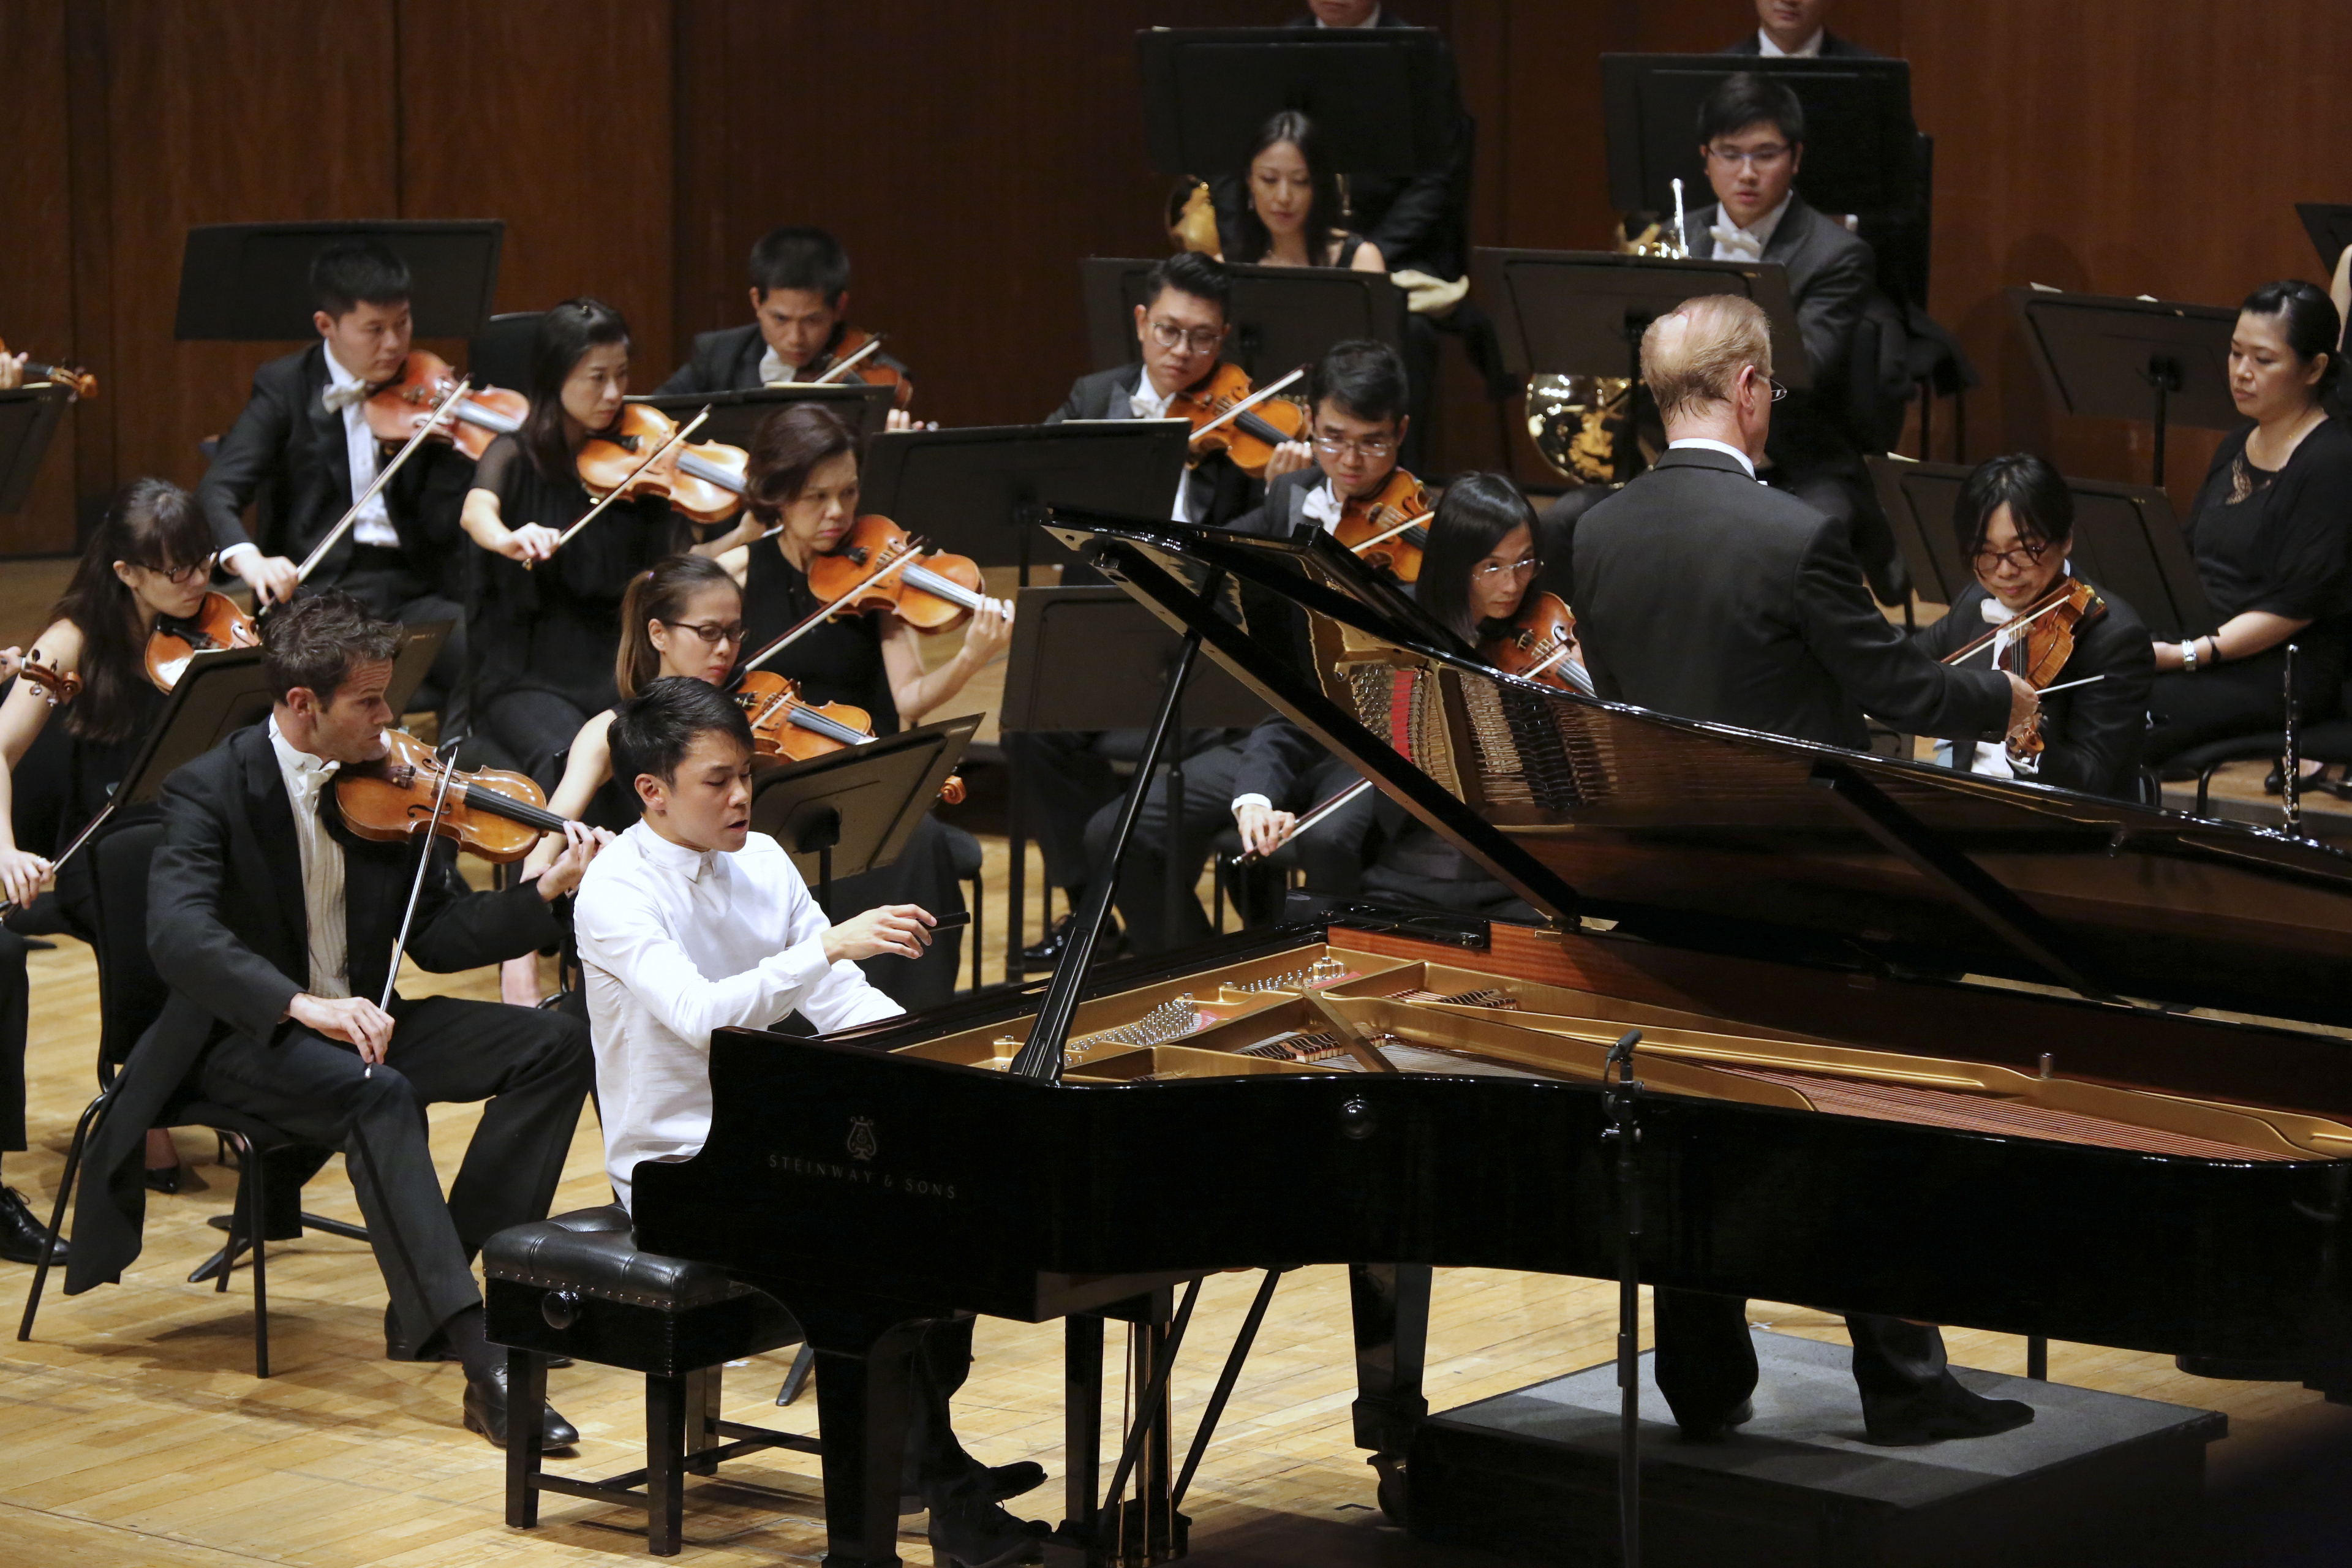 Ben Kim played with finesse but the expected explosions never arrived. Photos: Hong Kong Sinfonietta